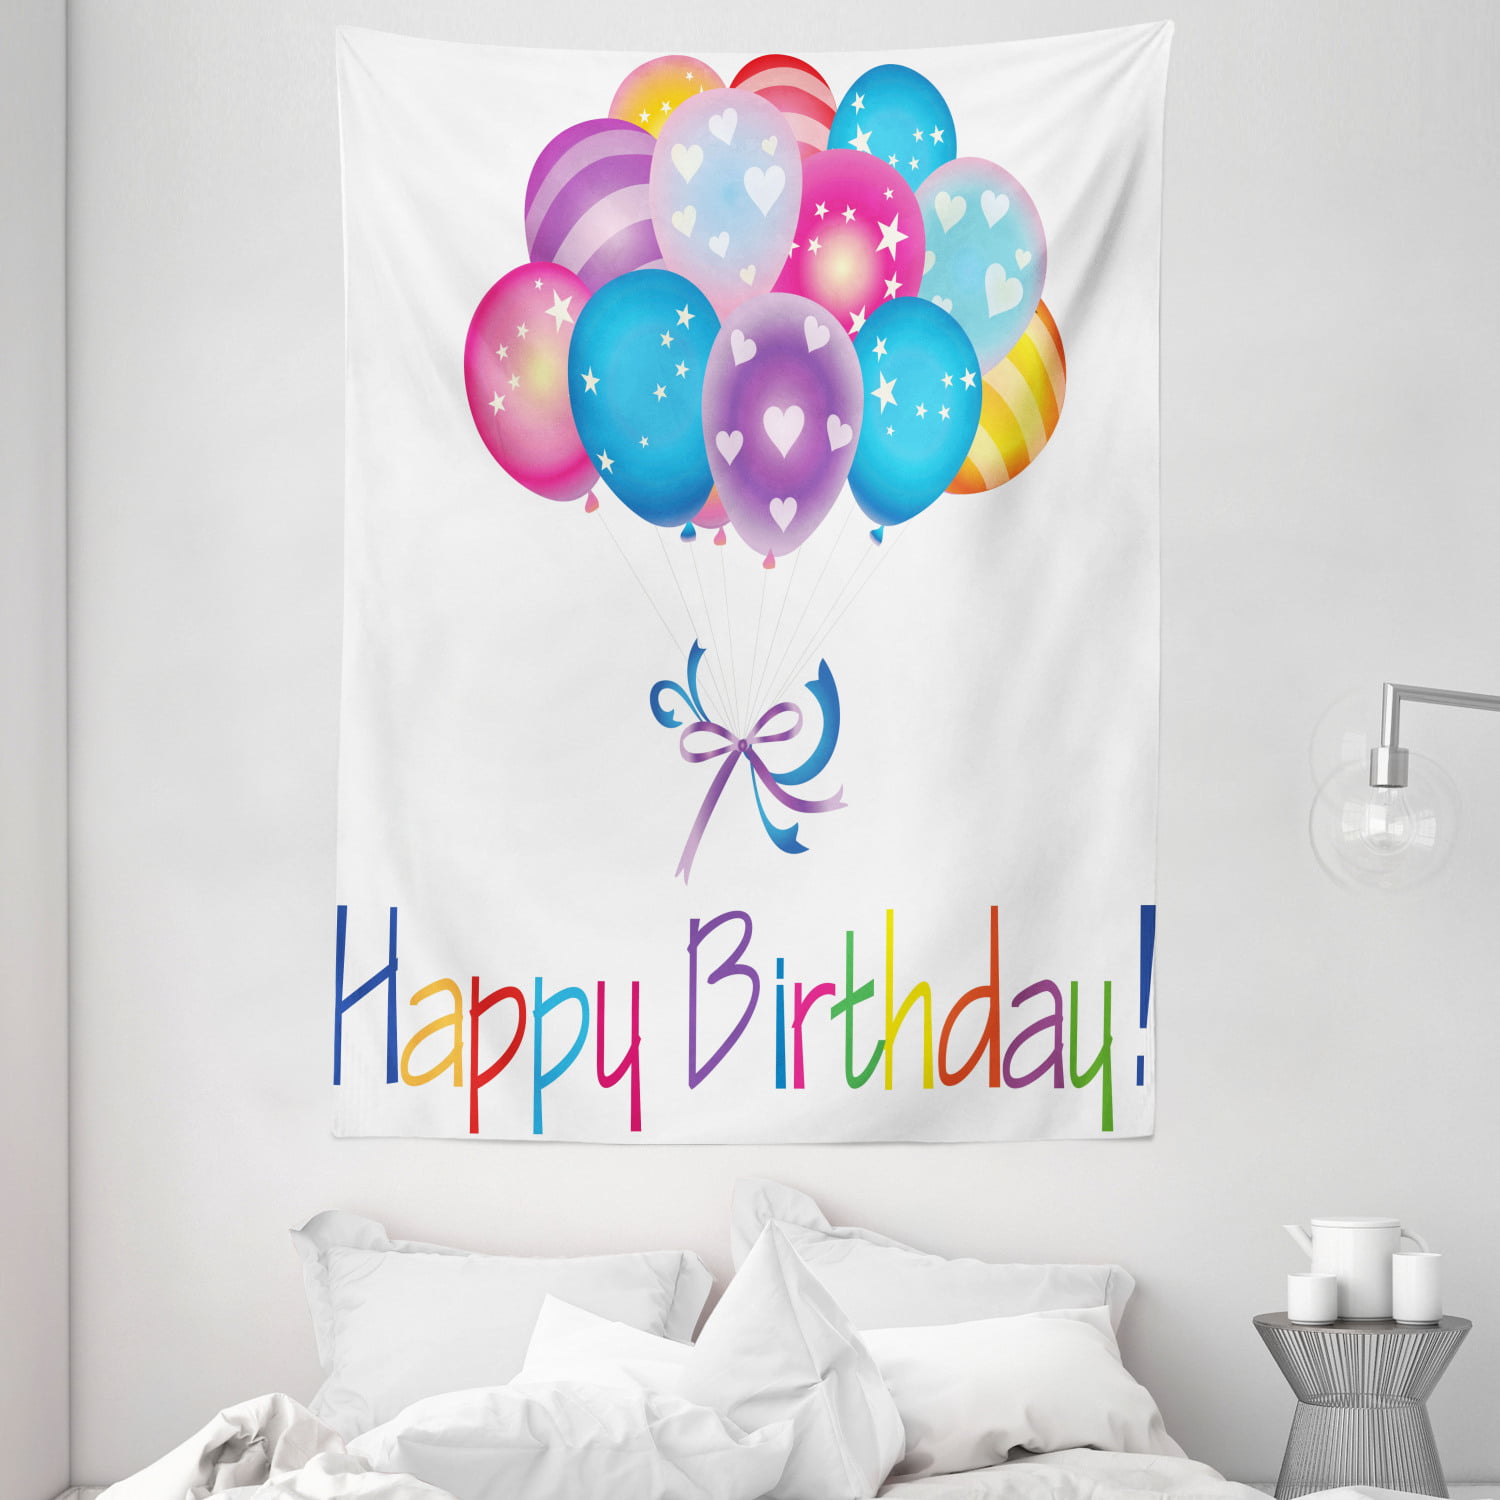 Birthday Decorations Tapestry, Balloon Bouquet with Stars and Heart Shapes  Best Wishes Joyfulness, Wall Hanging for Bedroom Living Room Dorm Decor,  60W X 80L Inches, Multicolor, by Ambesonne